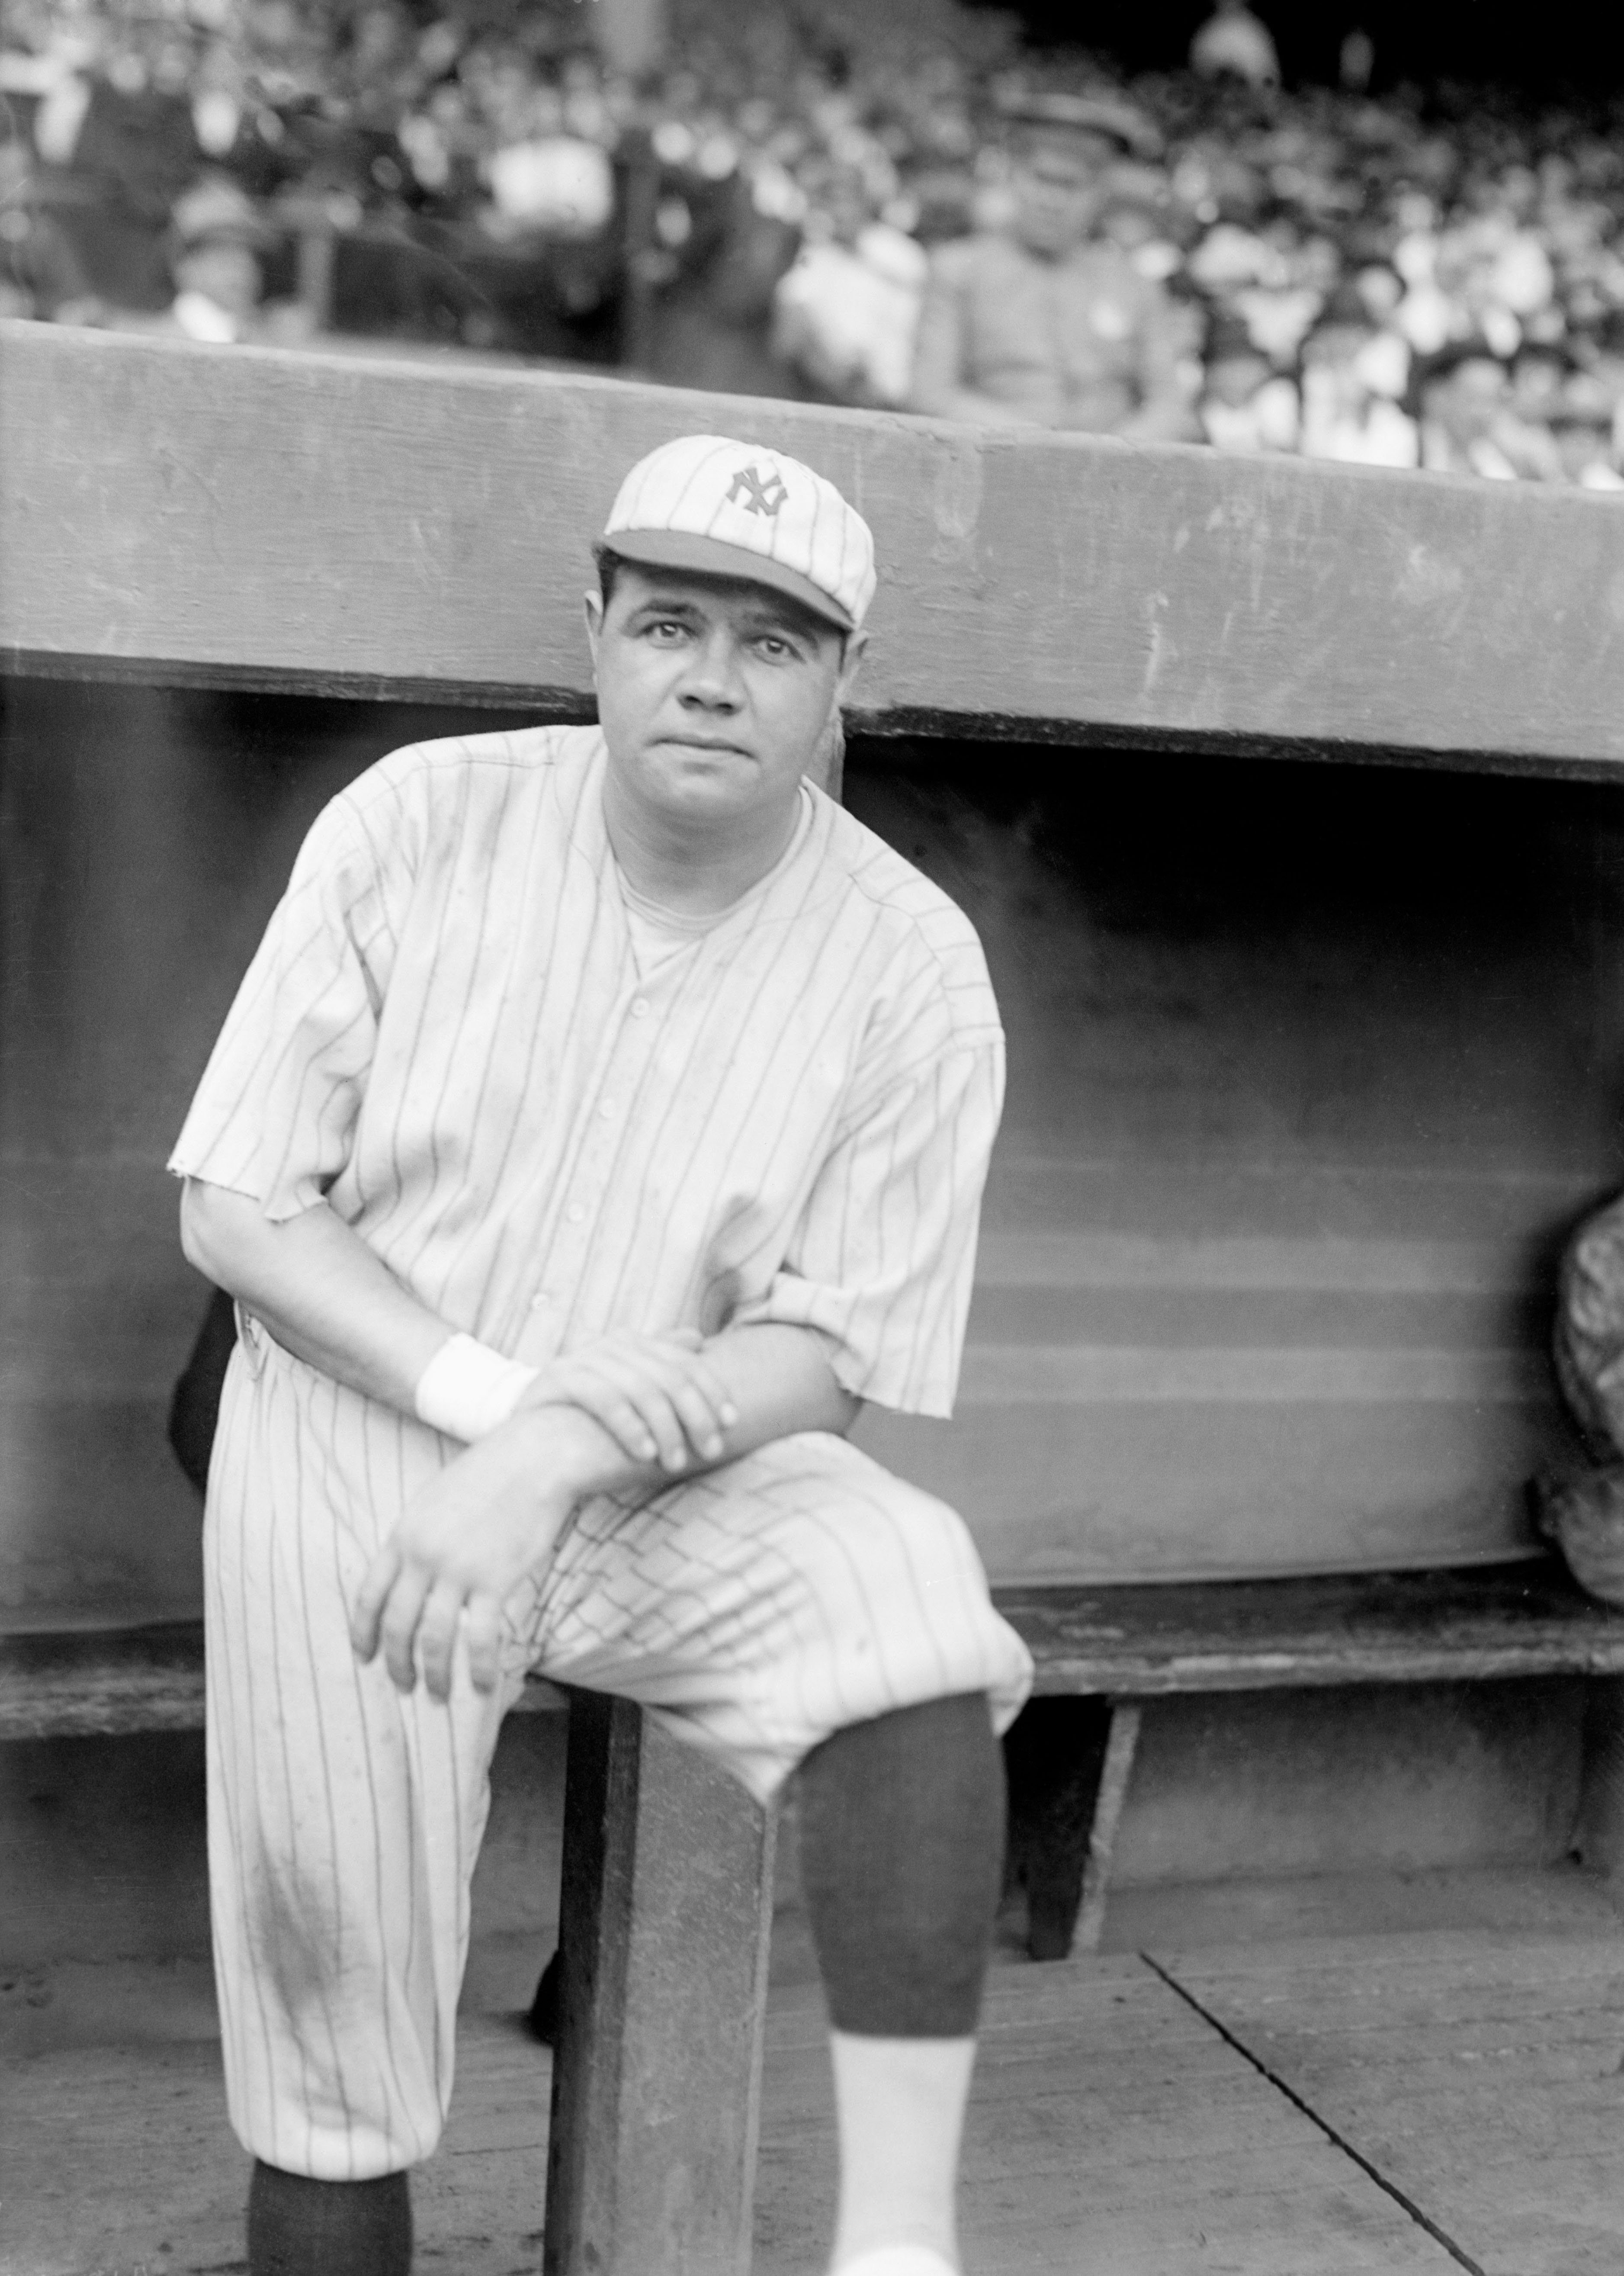 Mandatory Credit: Photo by Everett/Shutterstock (10284338a) Babe Ruth, 1921 Historical Collection